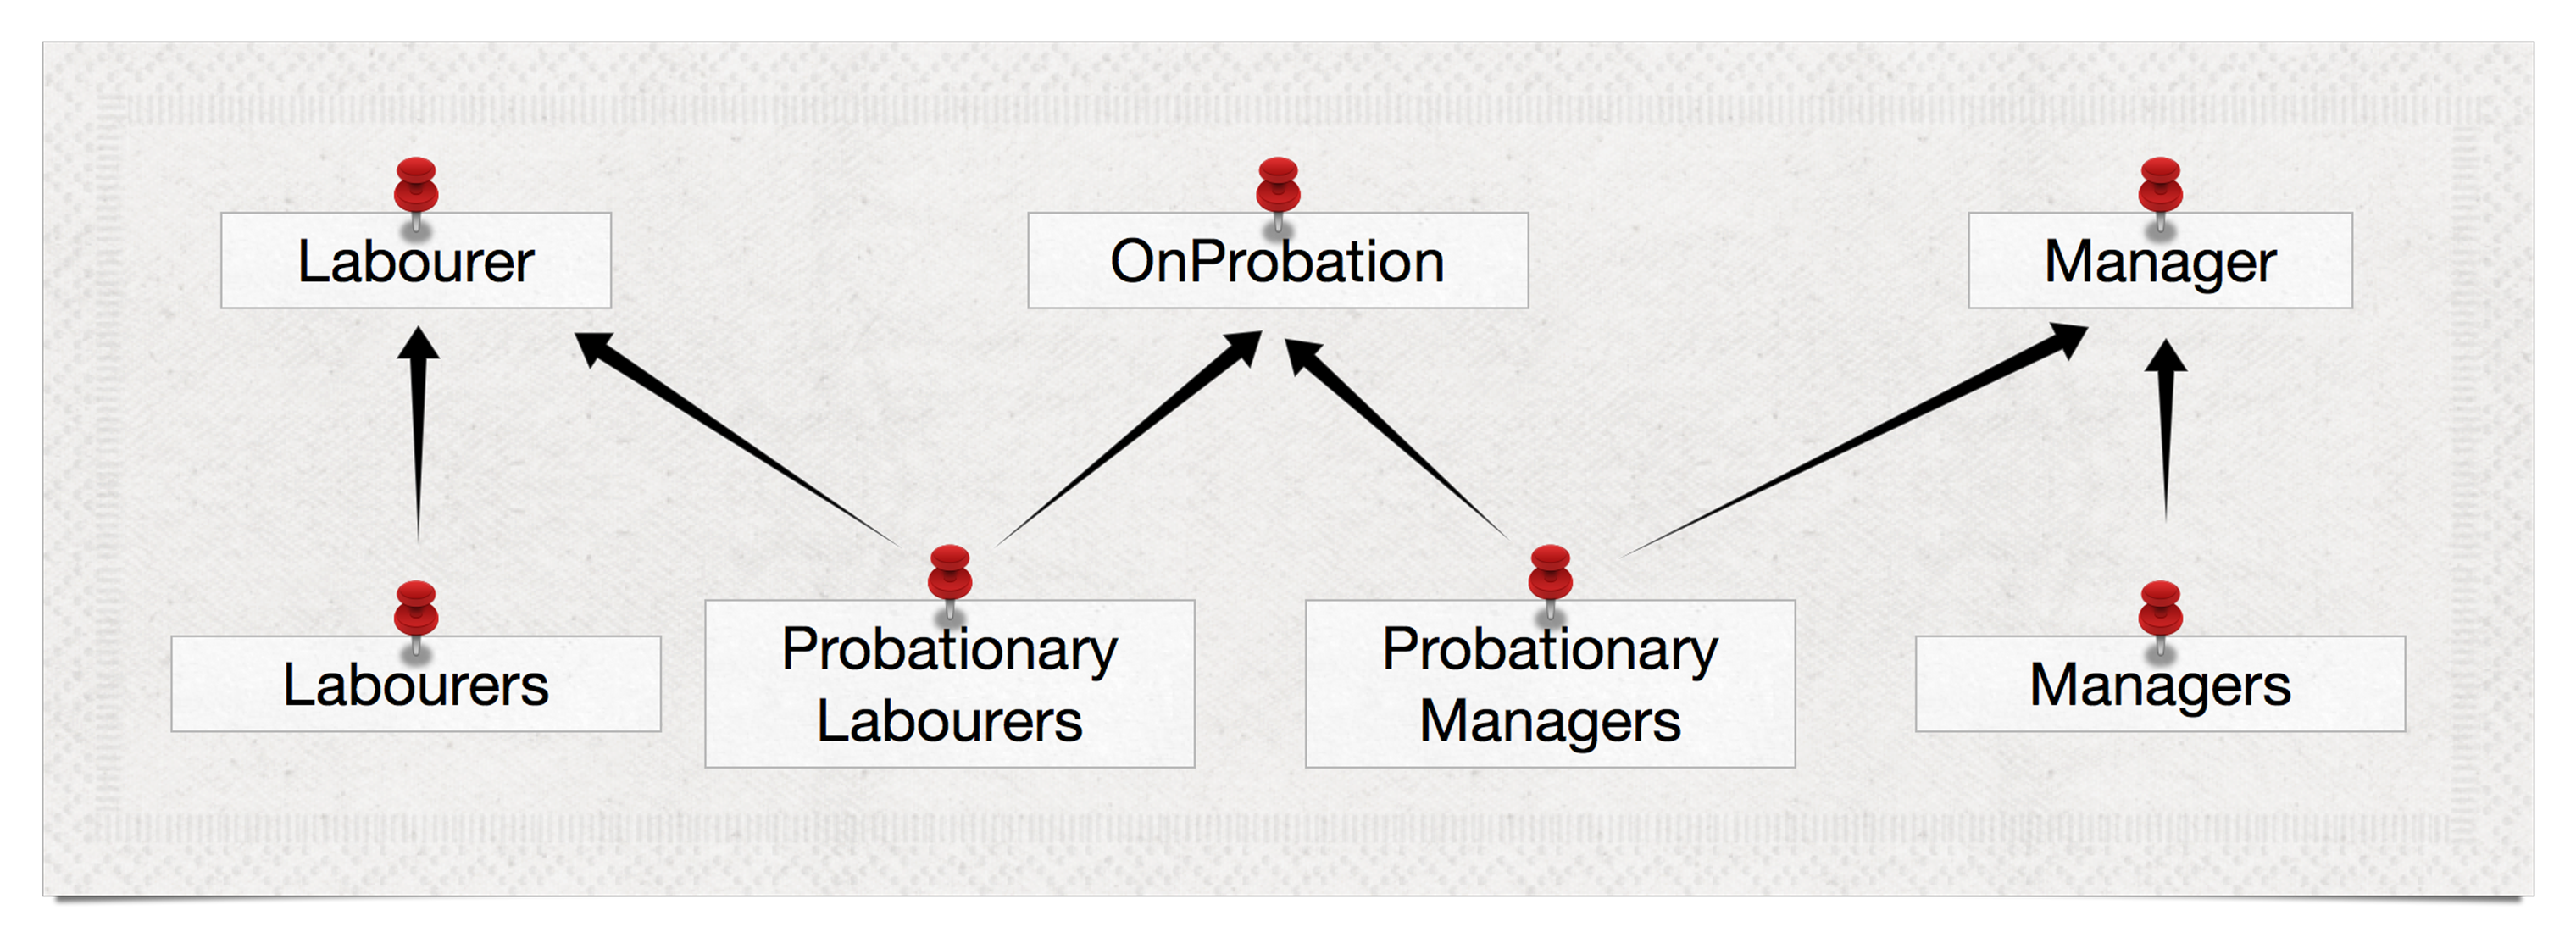 Labourers, Managers, and OnPobation